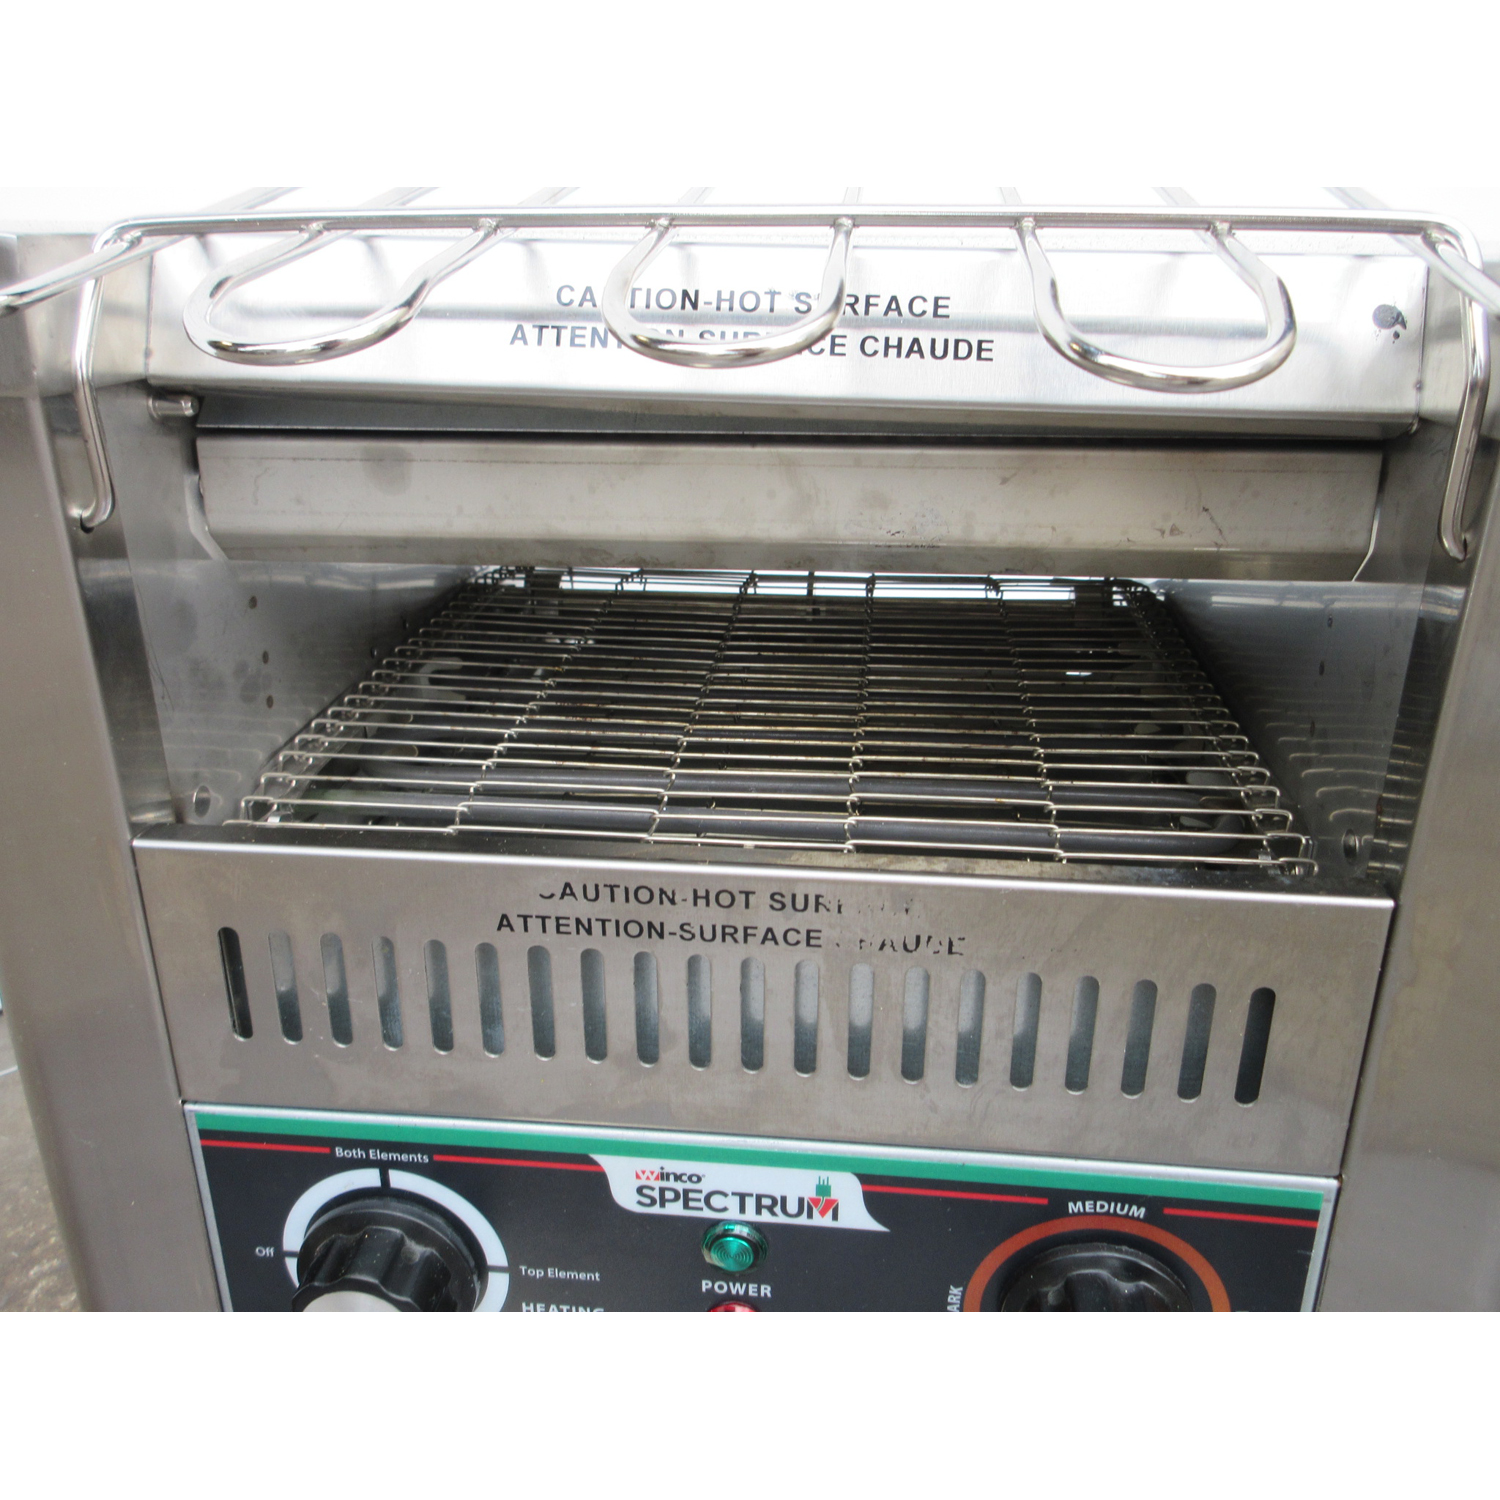 Winco ECT-700 Conveyor Toaster, Used Excellent Condition image 2